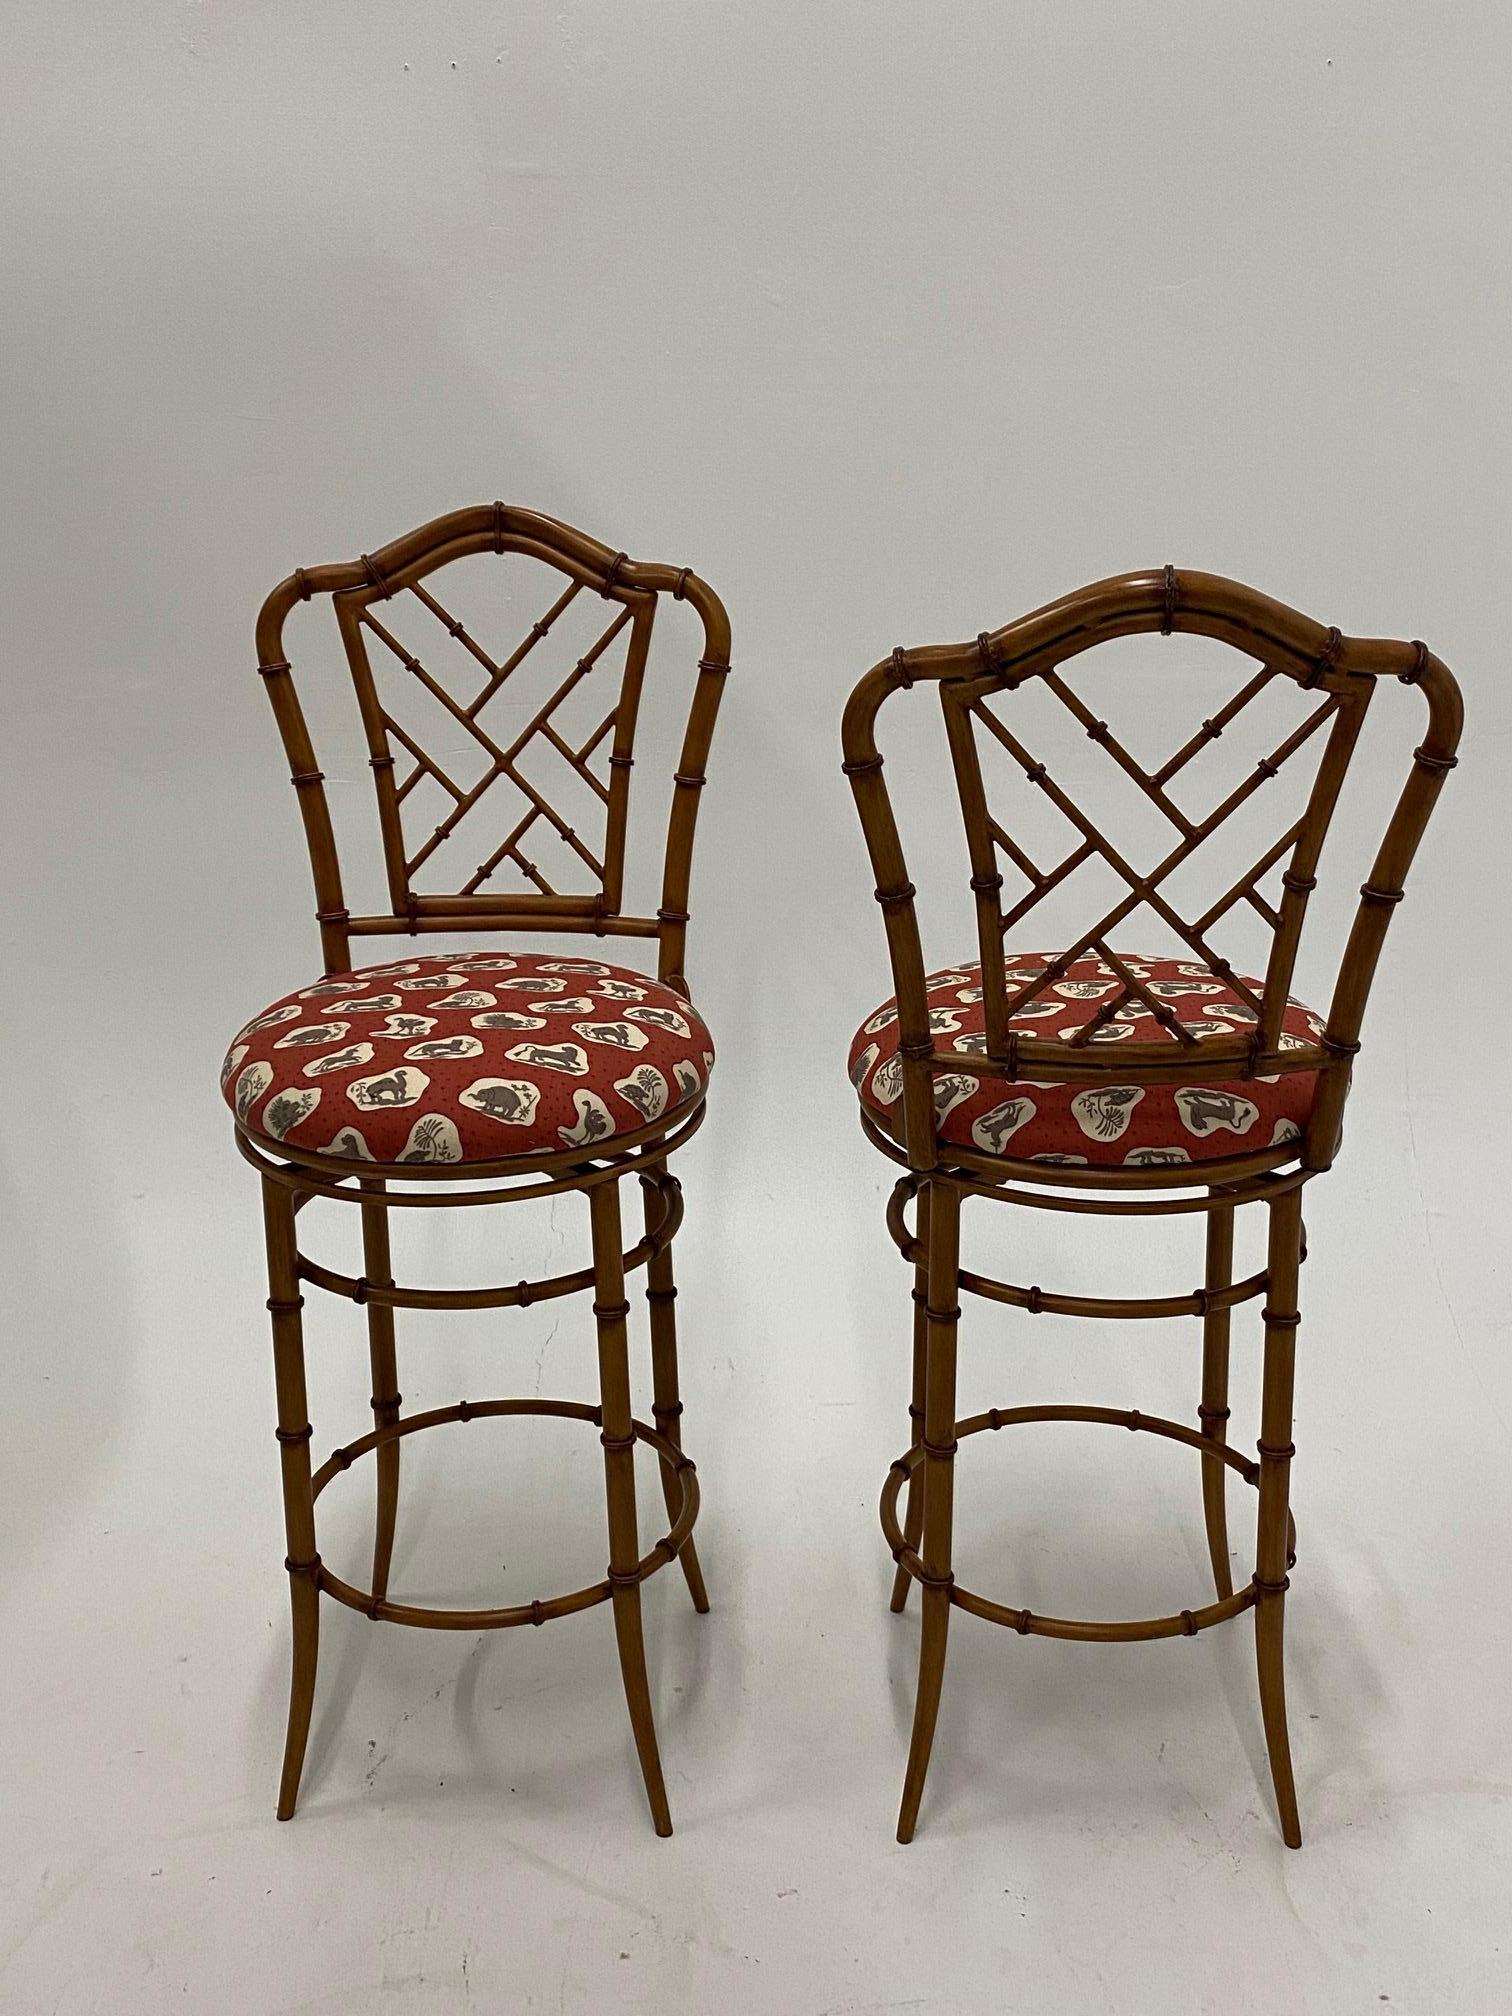 Handsome pair of faux bamboo counter stools made of cast steel with painted enamel finish and having upholstered swivel seats.